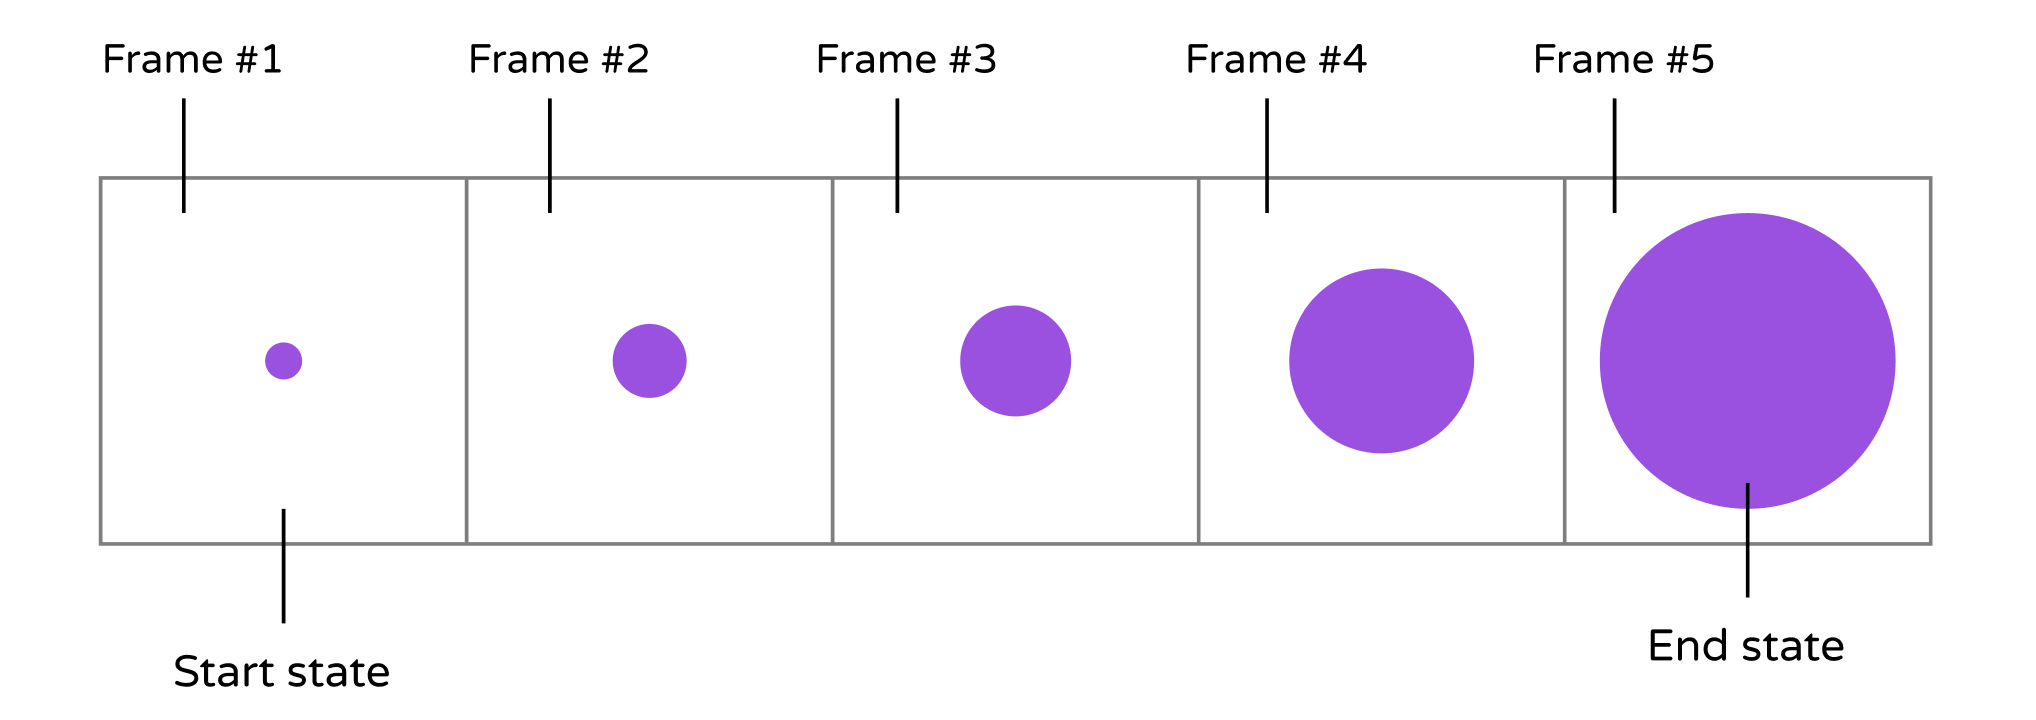 Figure 15-1. Sequence of frames for creating an animation